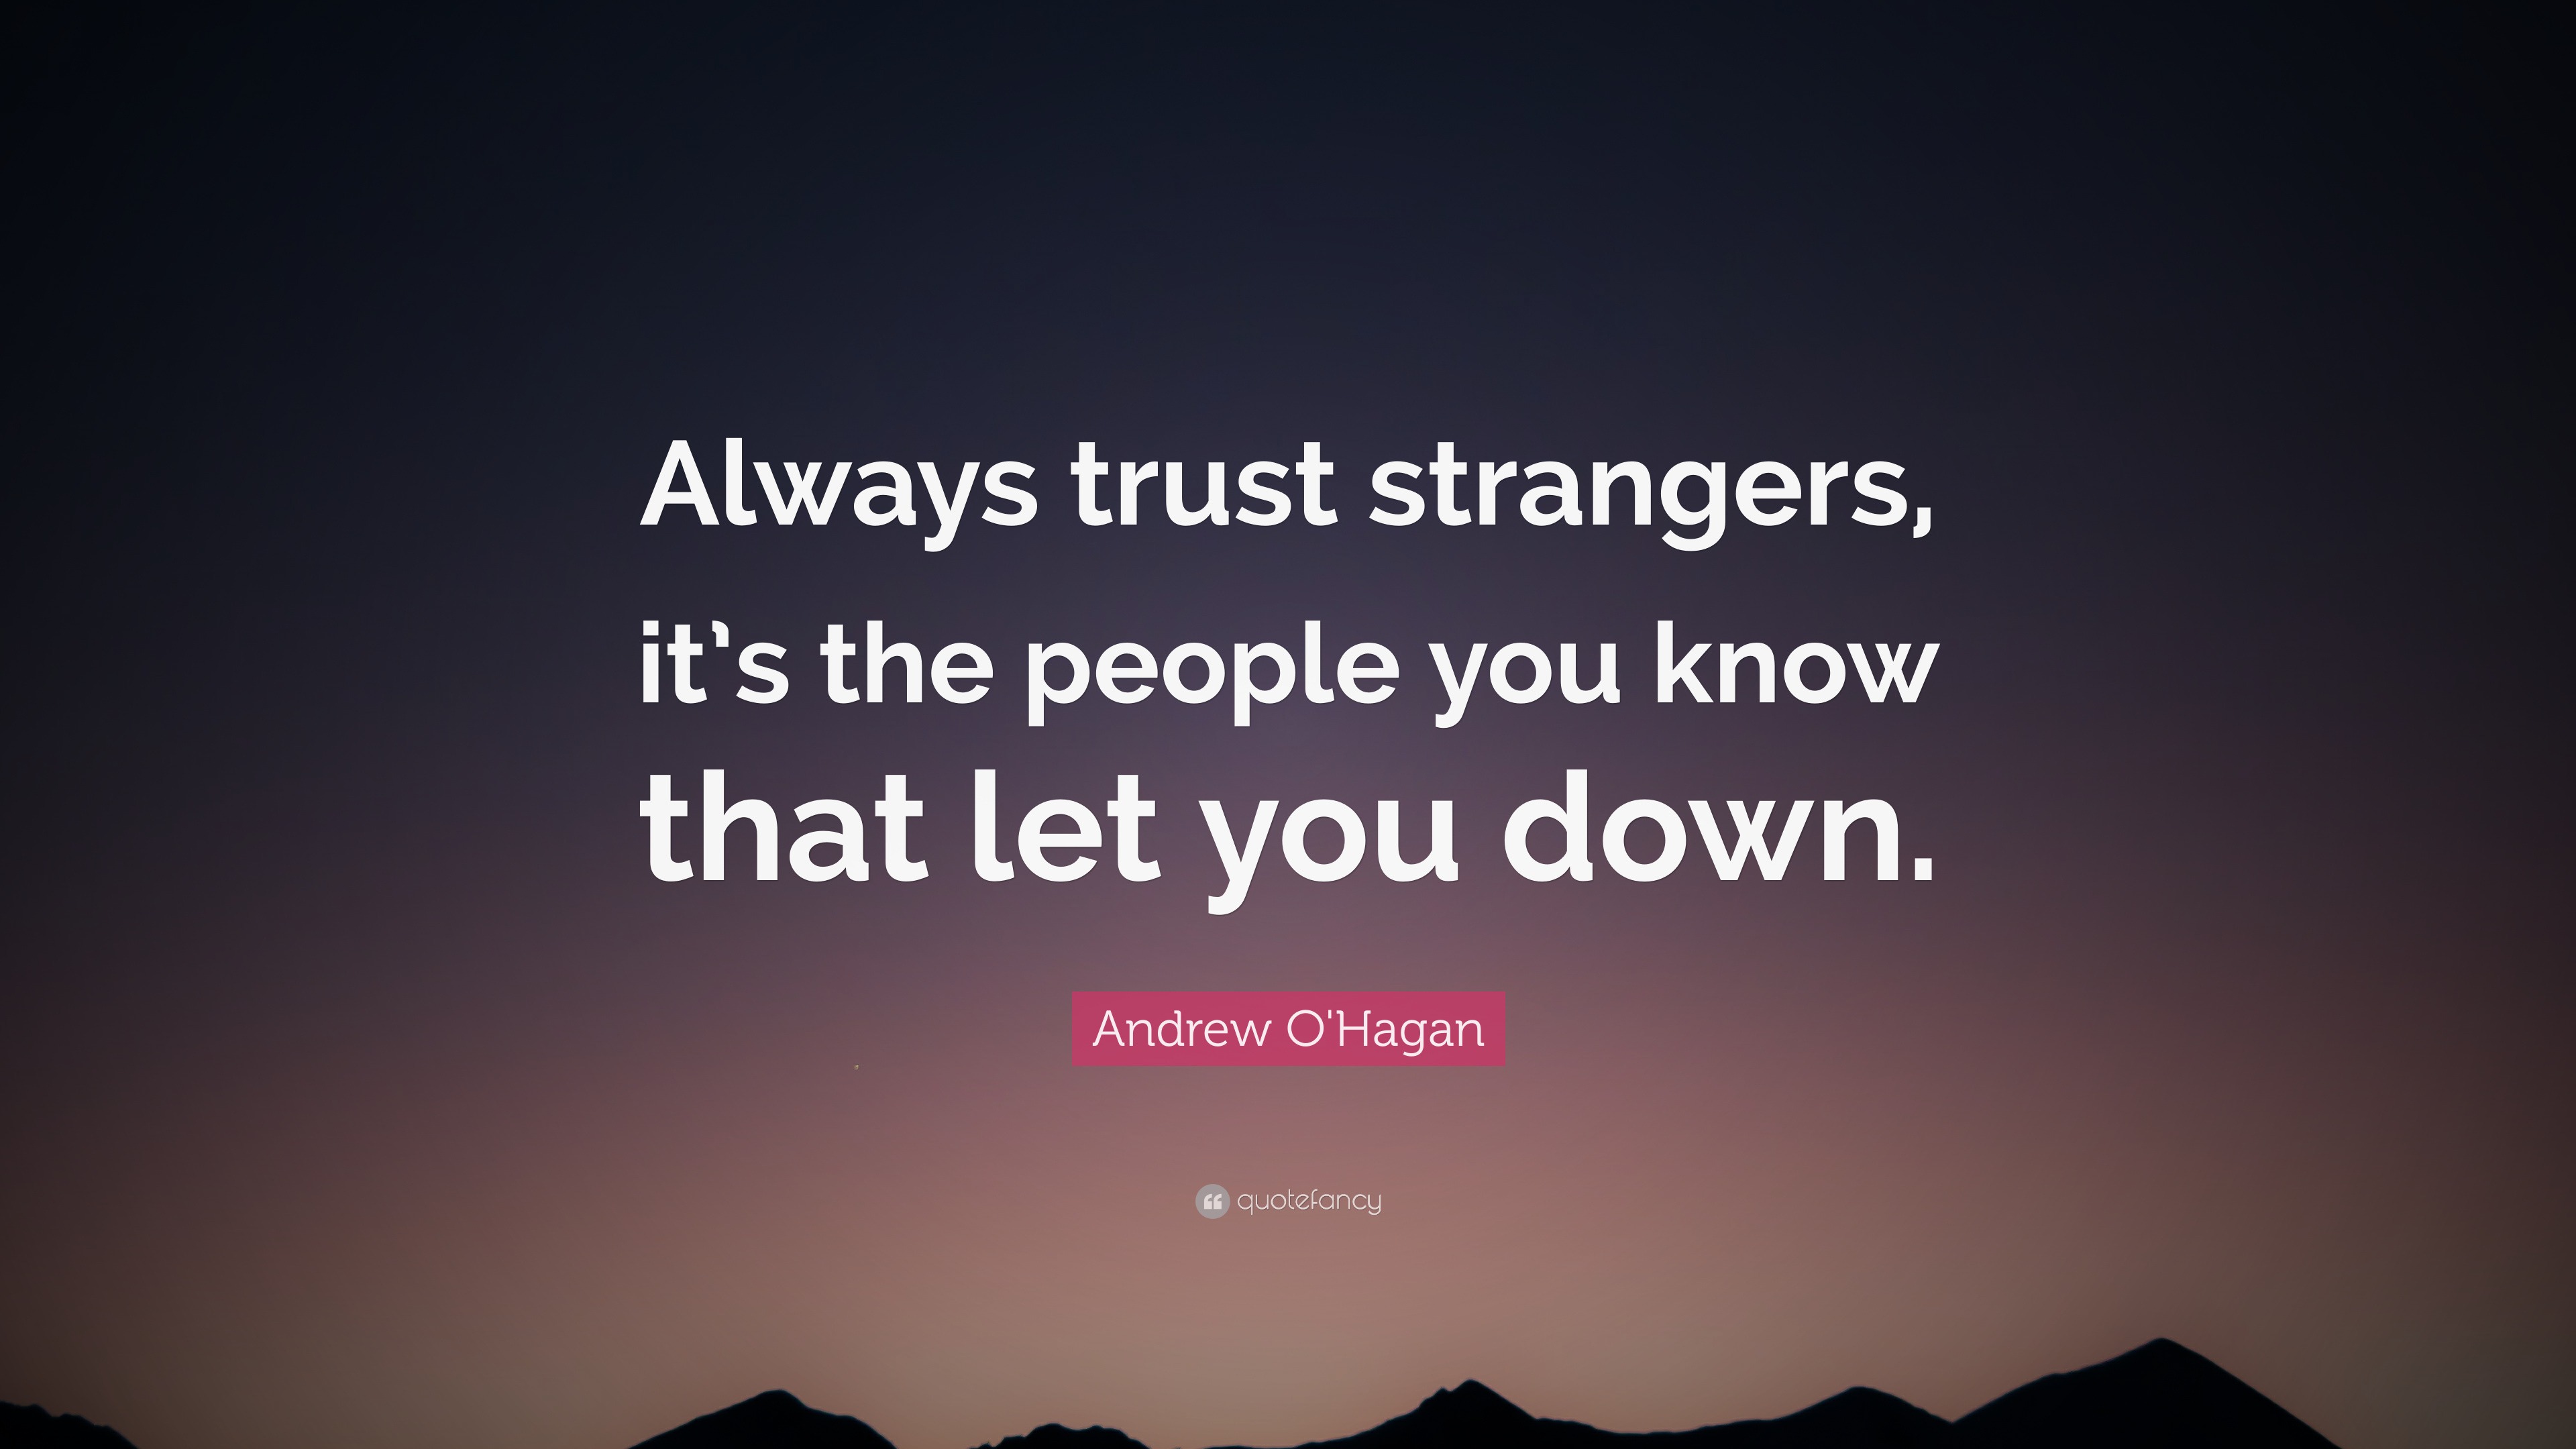 Andrew O'Hagan Quote: “Always trust strangers, it’s the people you know